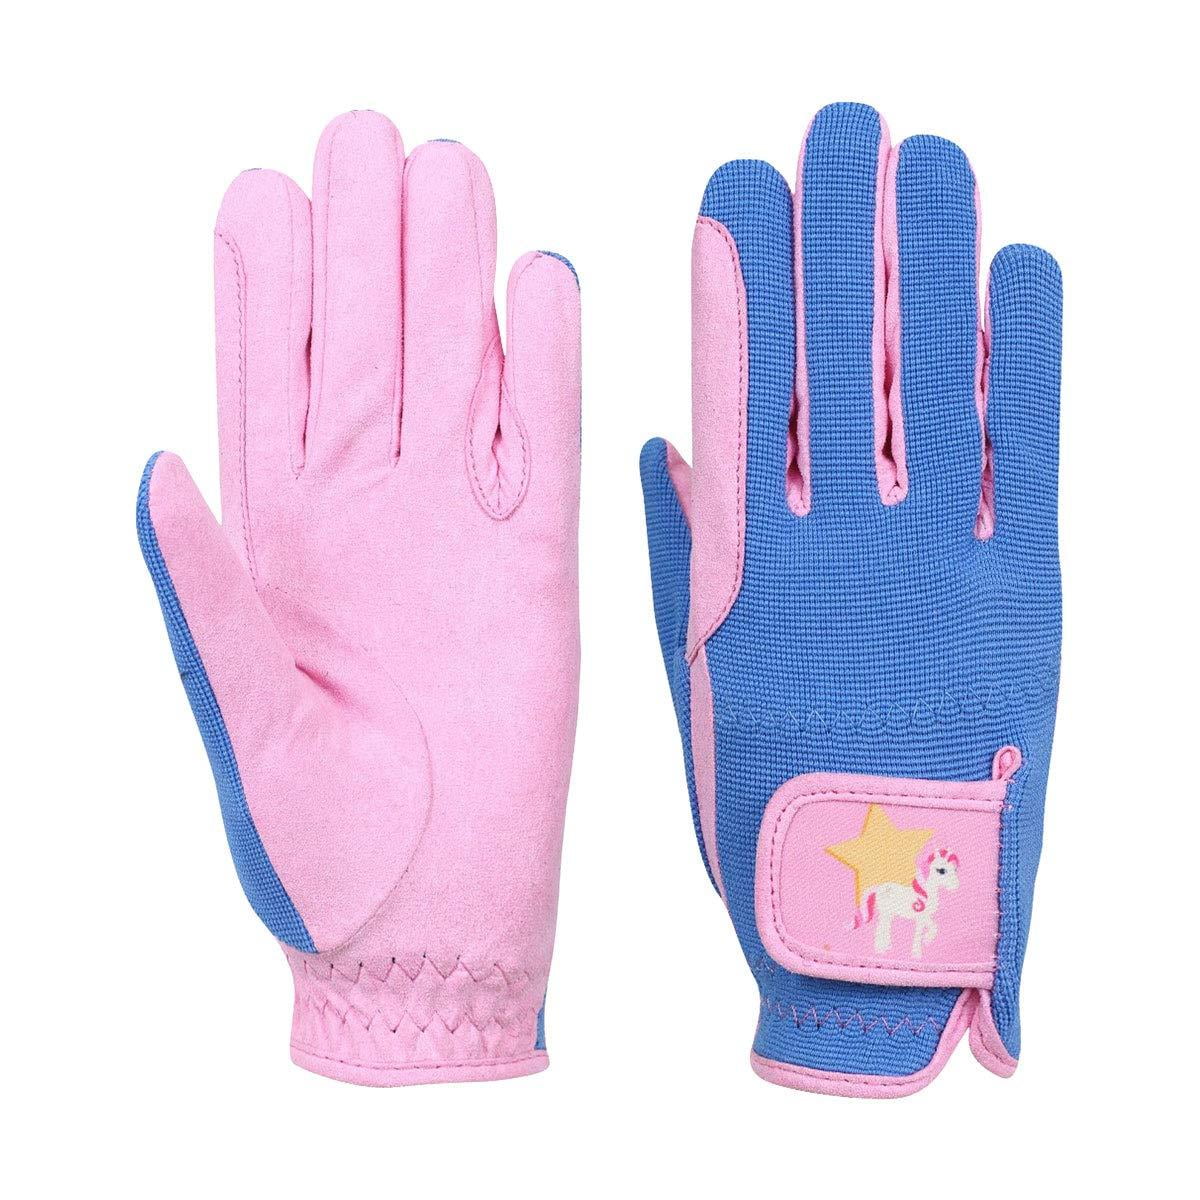 HKM Pro Team Kids Junior Galloping Horse Breathable Better Grip Riding Glove